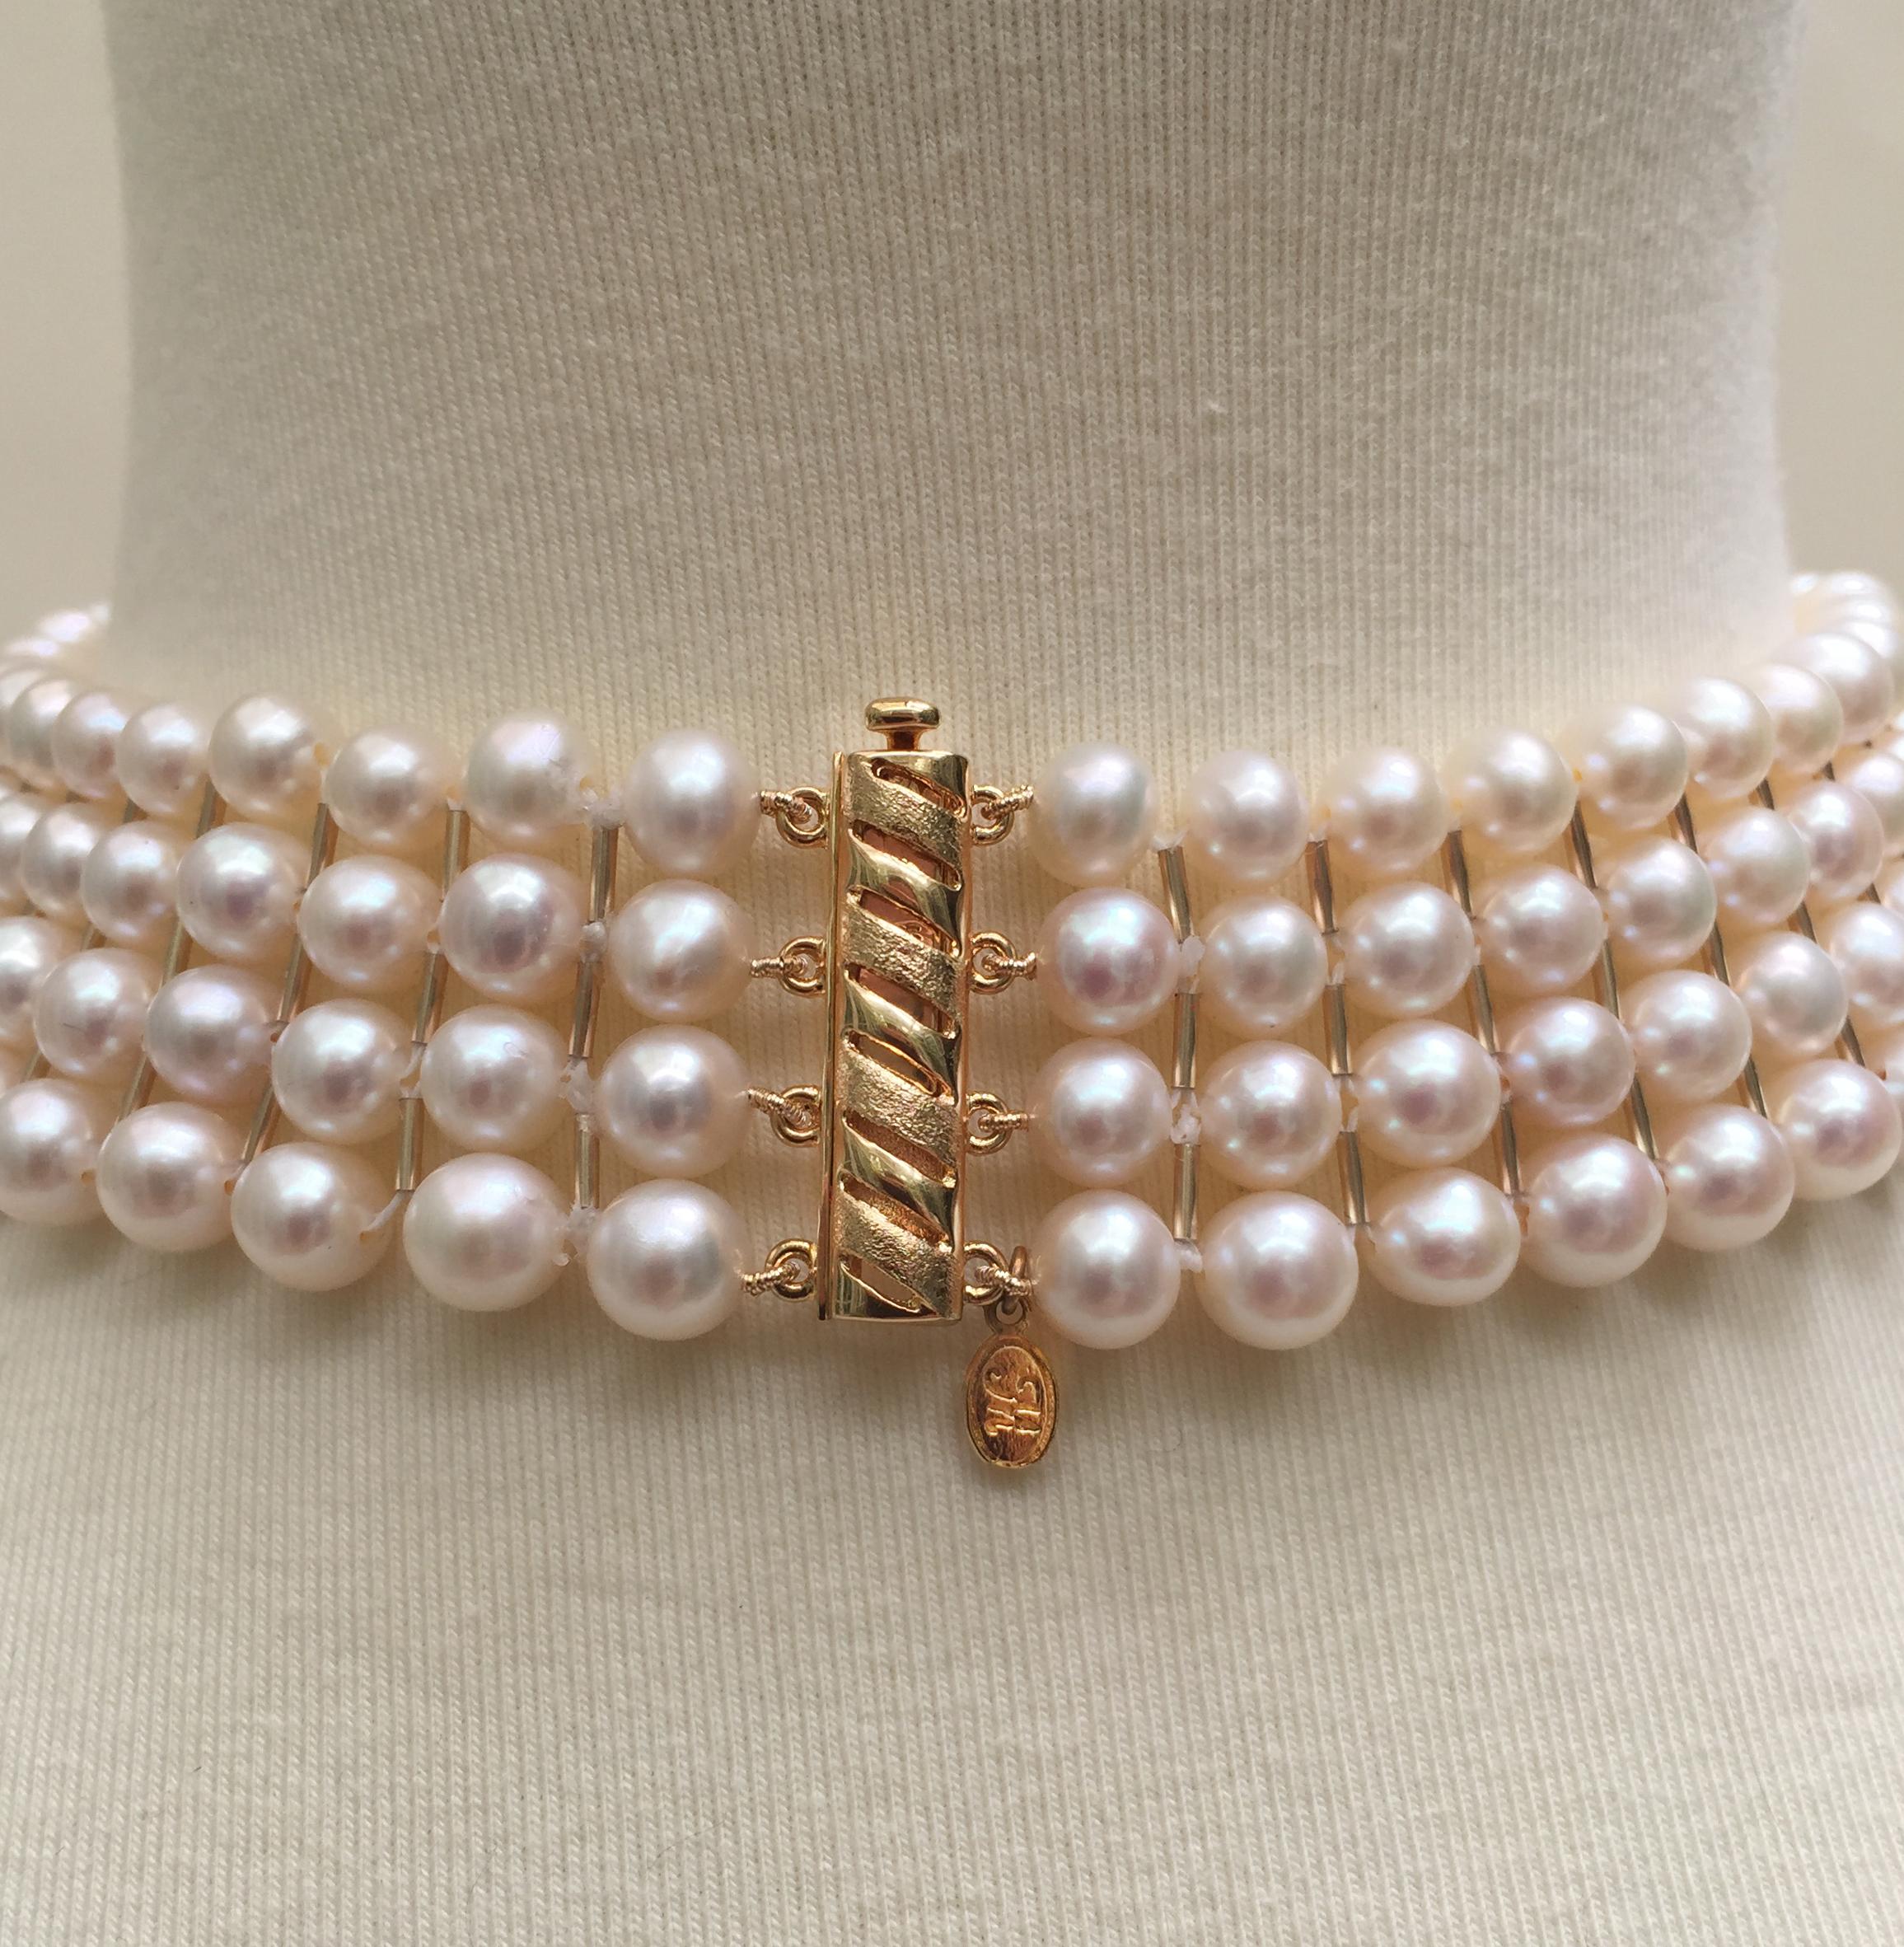 This woven white pearl choker with silver gold plated rods and sliding clasp is handwoven by Marina J.  A slight curve is added to the necklace to fit the curve of the natural neckline, adding a sense of grace to this already beautiful choker.  Each